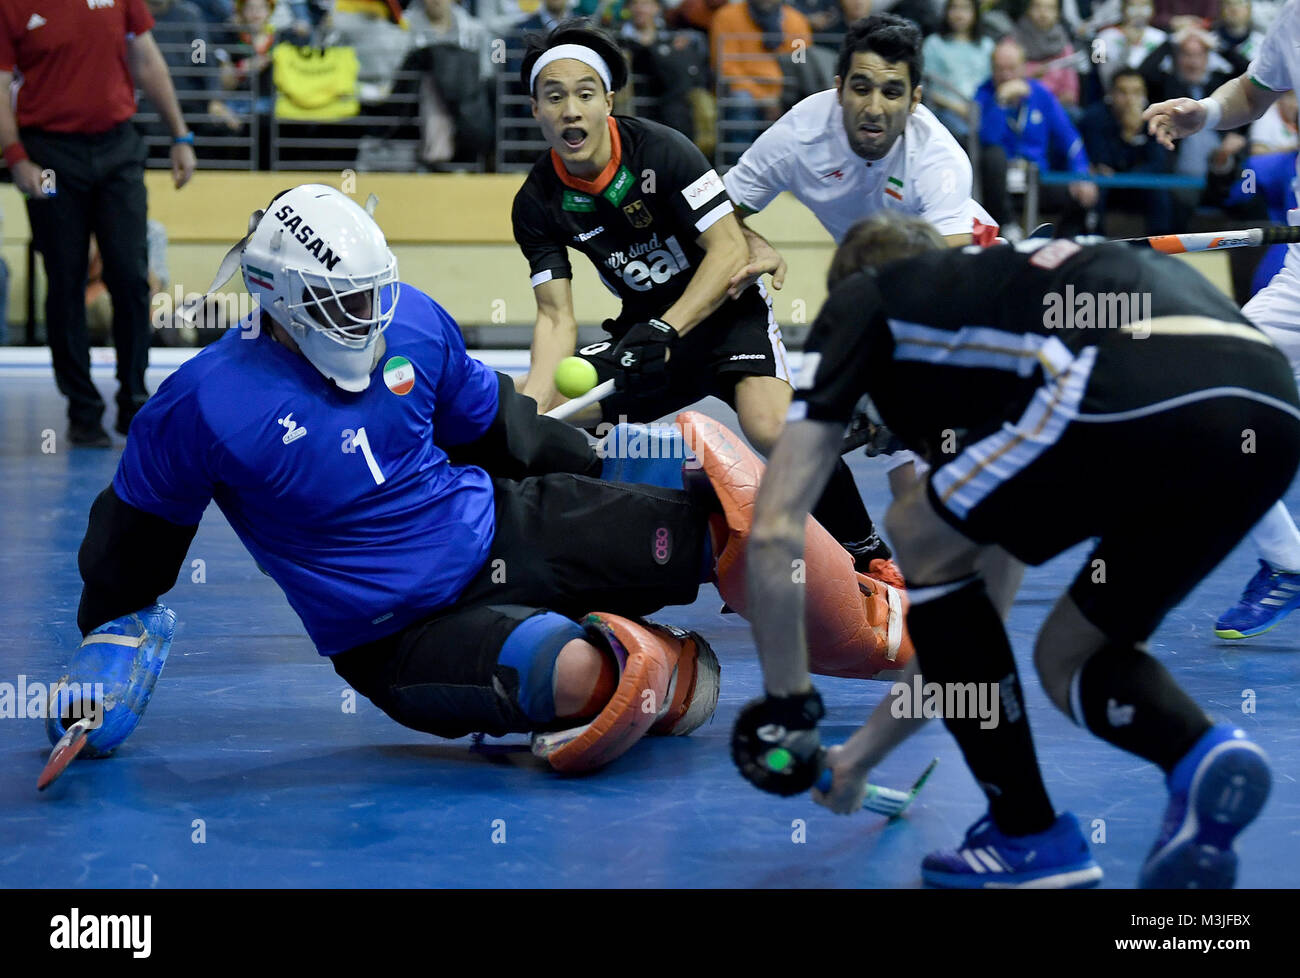 Iran's goalkeeper Sasan Hatami Nejad (L) defends his goal against Dan Nguyen (C) and Marco Miltkau (R) of Germany during the men's Indoor Hockey World Cup 2018 semifinals match between Germany and the Iran at the Max-Schmeling Halle in Berlin, Germany, 10 Febuary 2018. Photo: Britta Pedersen/dpa Stock Photo